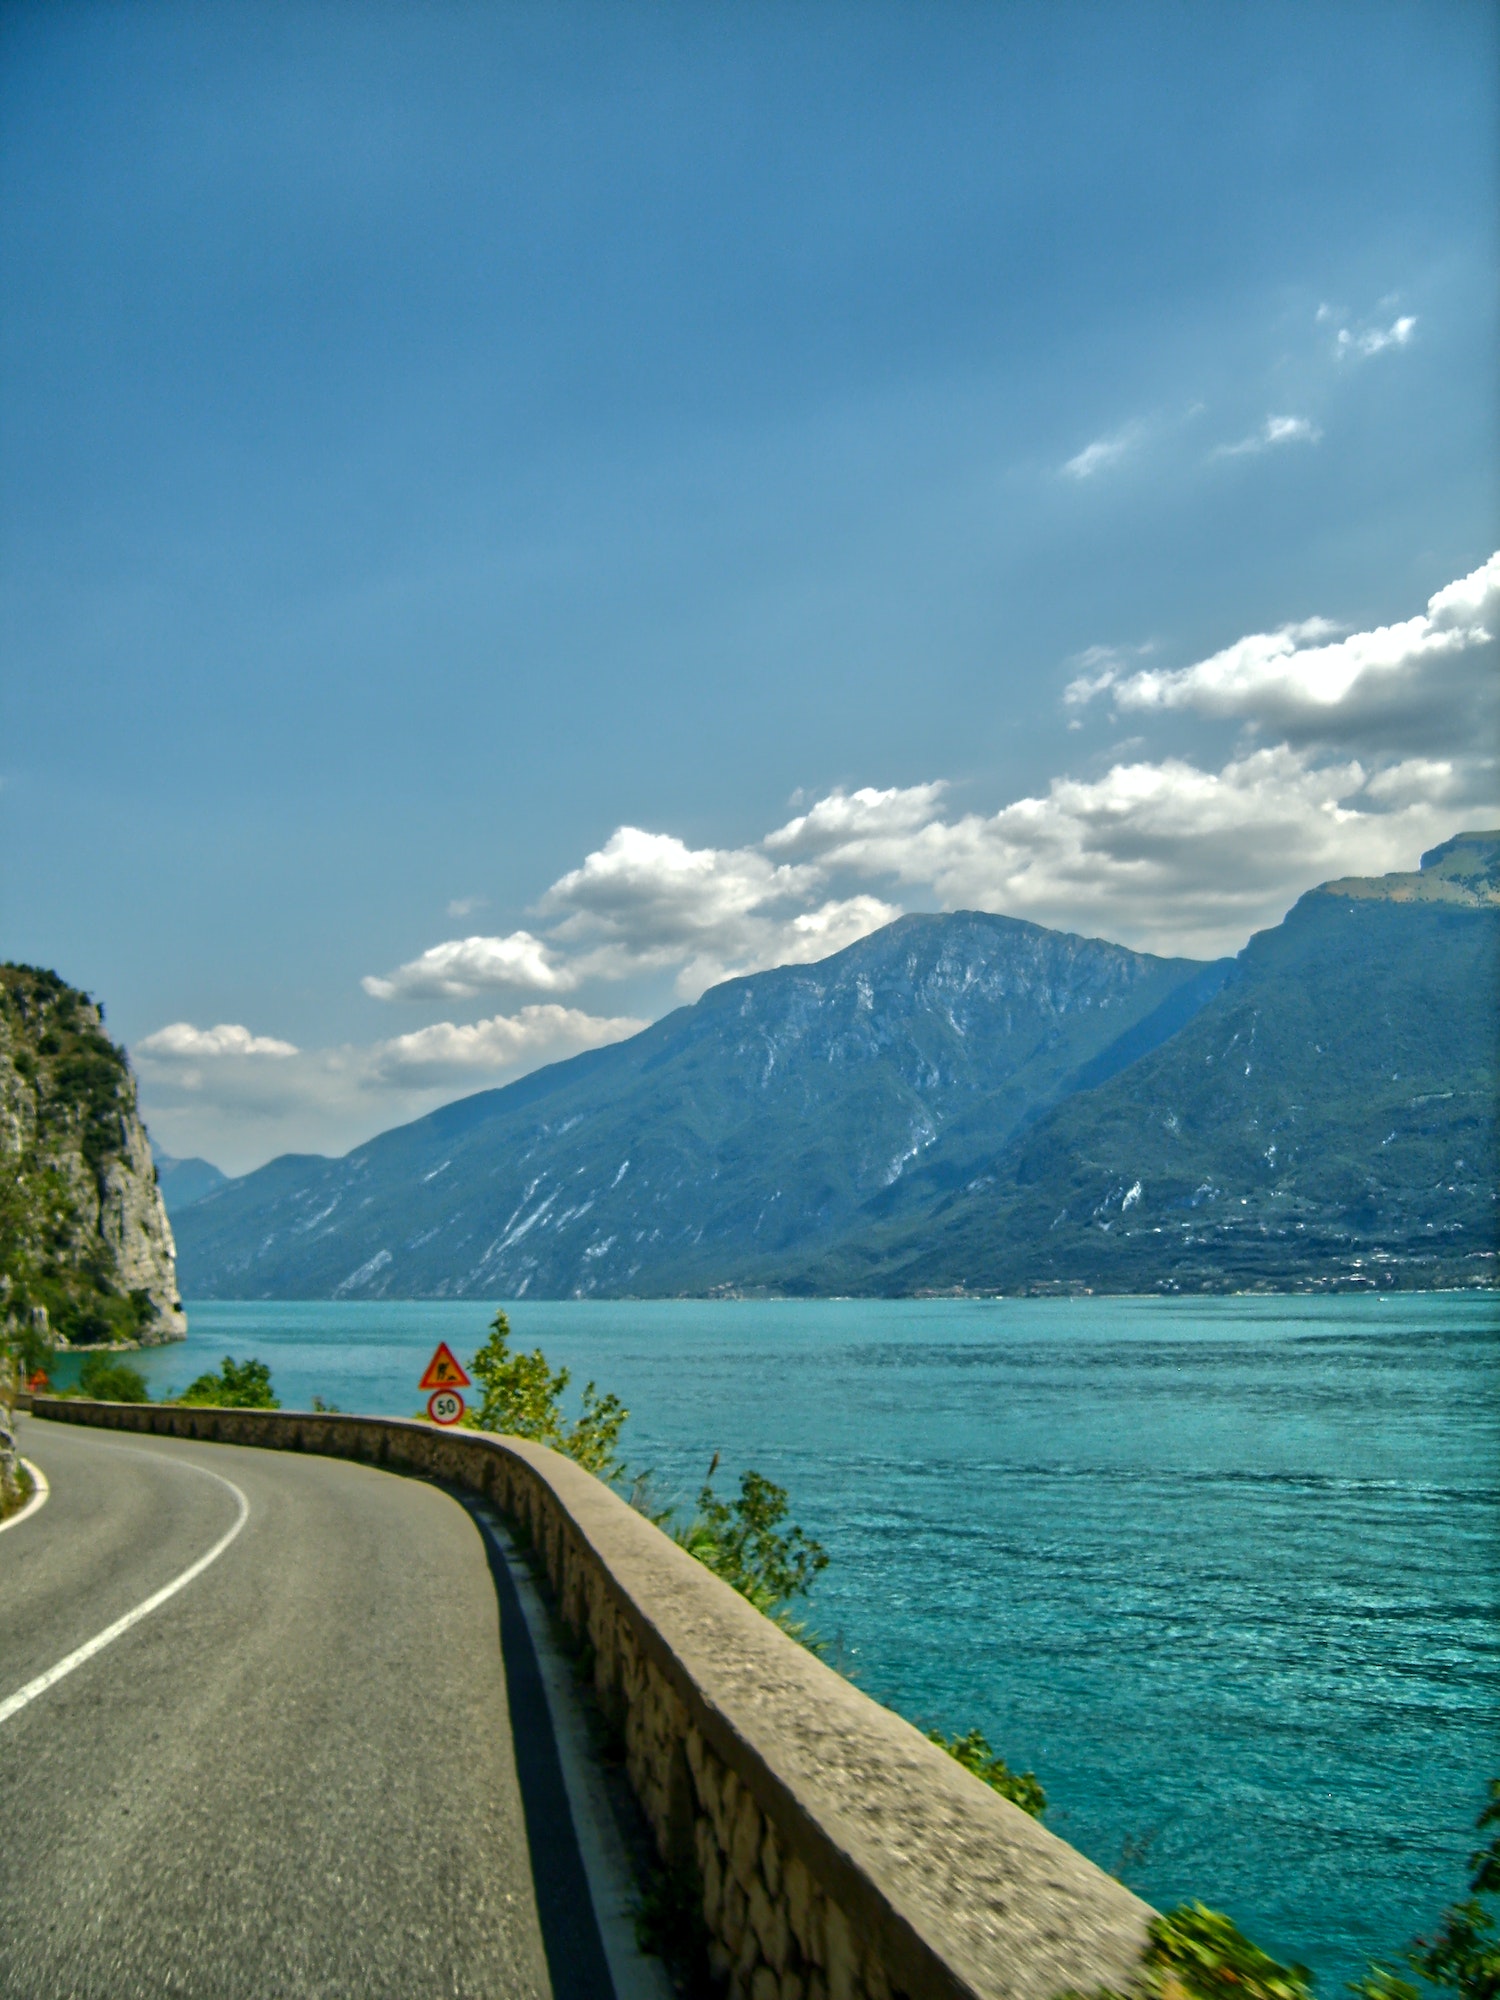 Vertical shot of a curving road going along Lake Garda in Italy